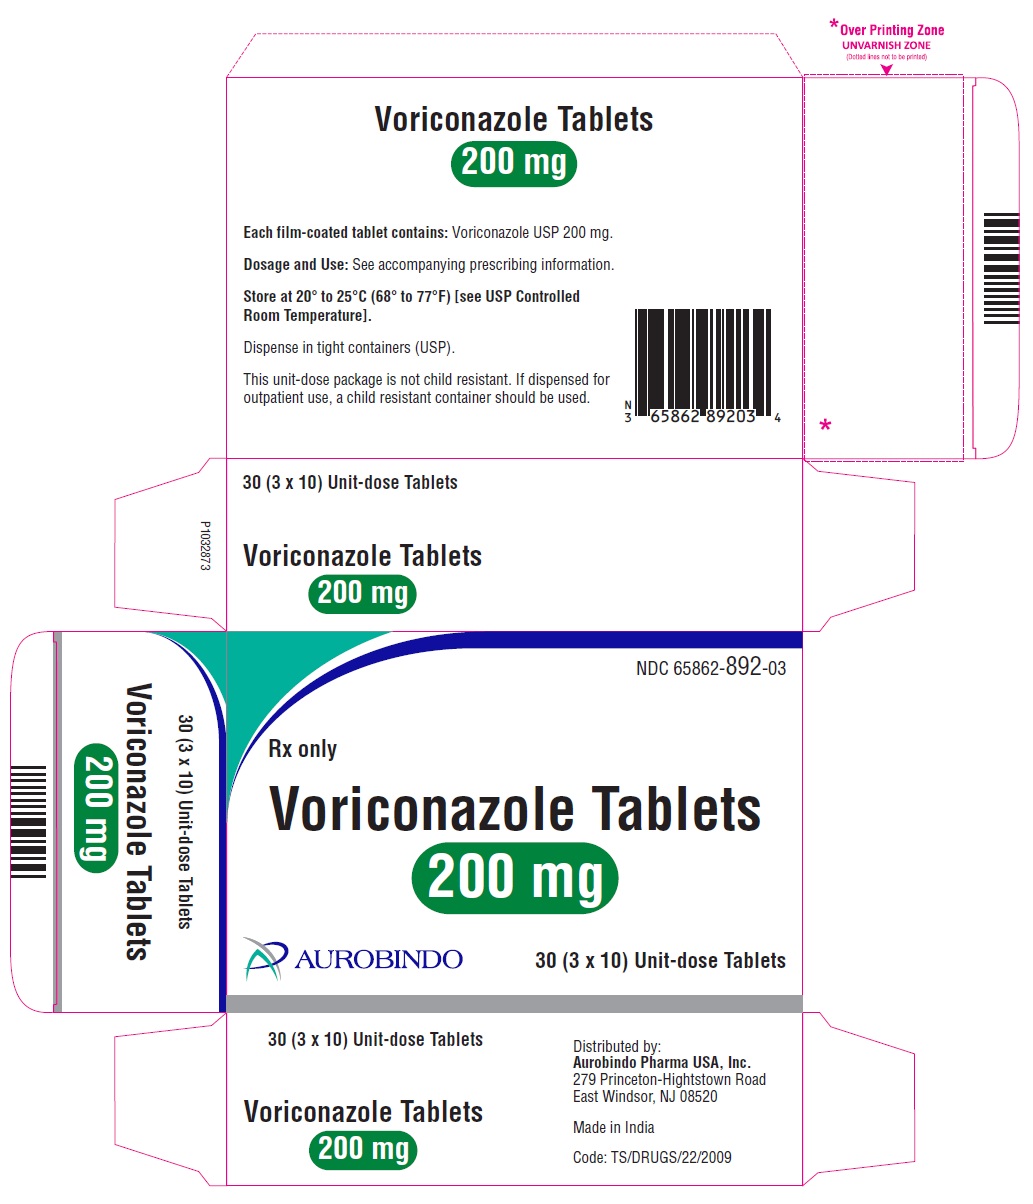 PACKAGE LABEL-PRINCIPAL DISPLAY PANEL - 200 mg Blister Carton 30 (3 x 10) Unit-dose Tablets